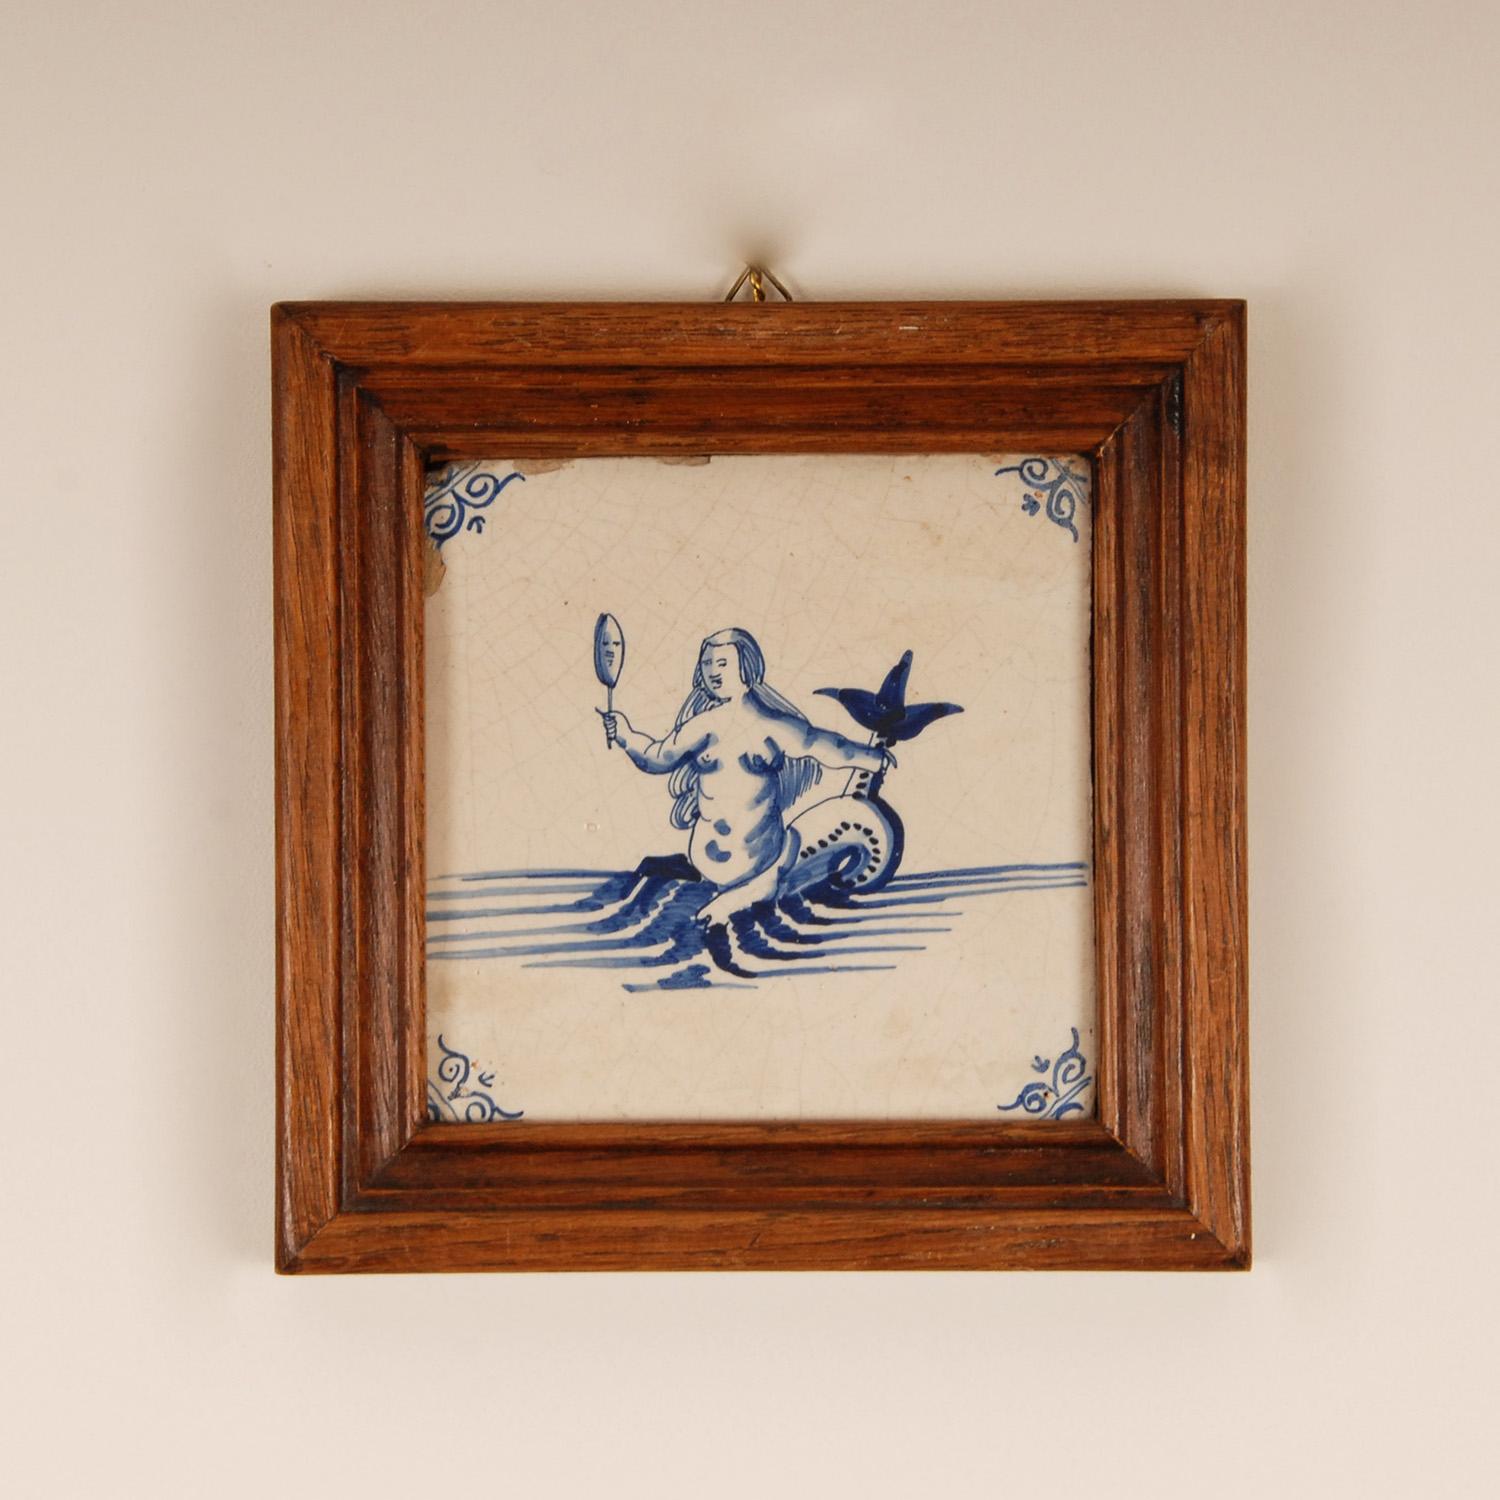 18th Century Delft Tiles Oak Framed Blue and White Mermaid Dutch Delftware Tiles In Good Condition For Sale In Wommelgem, VAN